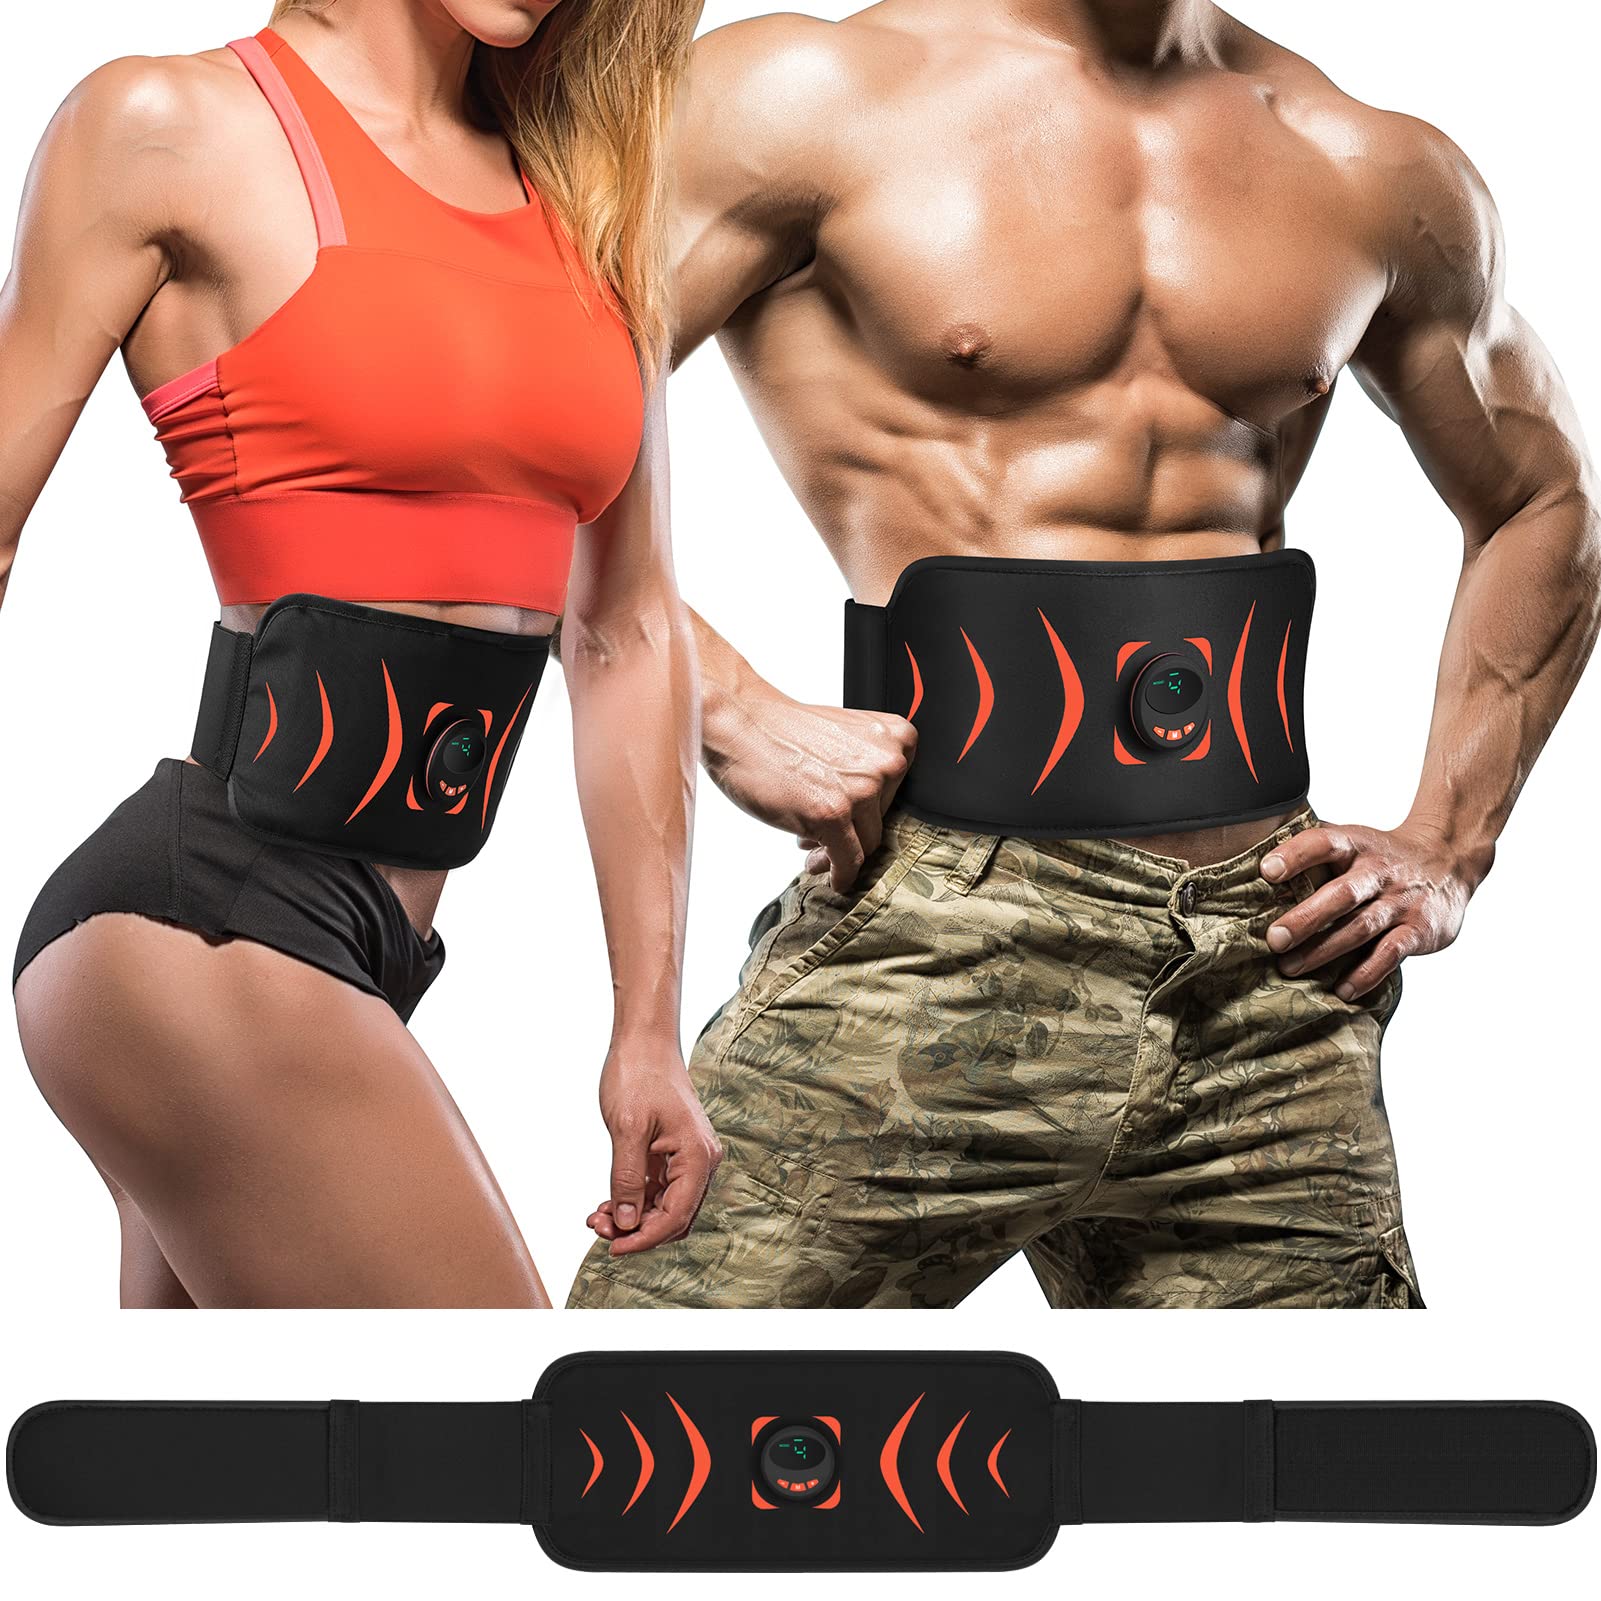 FOPIE ABS Abdominal Toning Trainer, Abs Workout Equipment, Ab Sport  Exercise Belt for Men and Women Orange